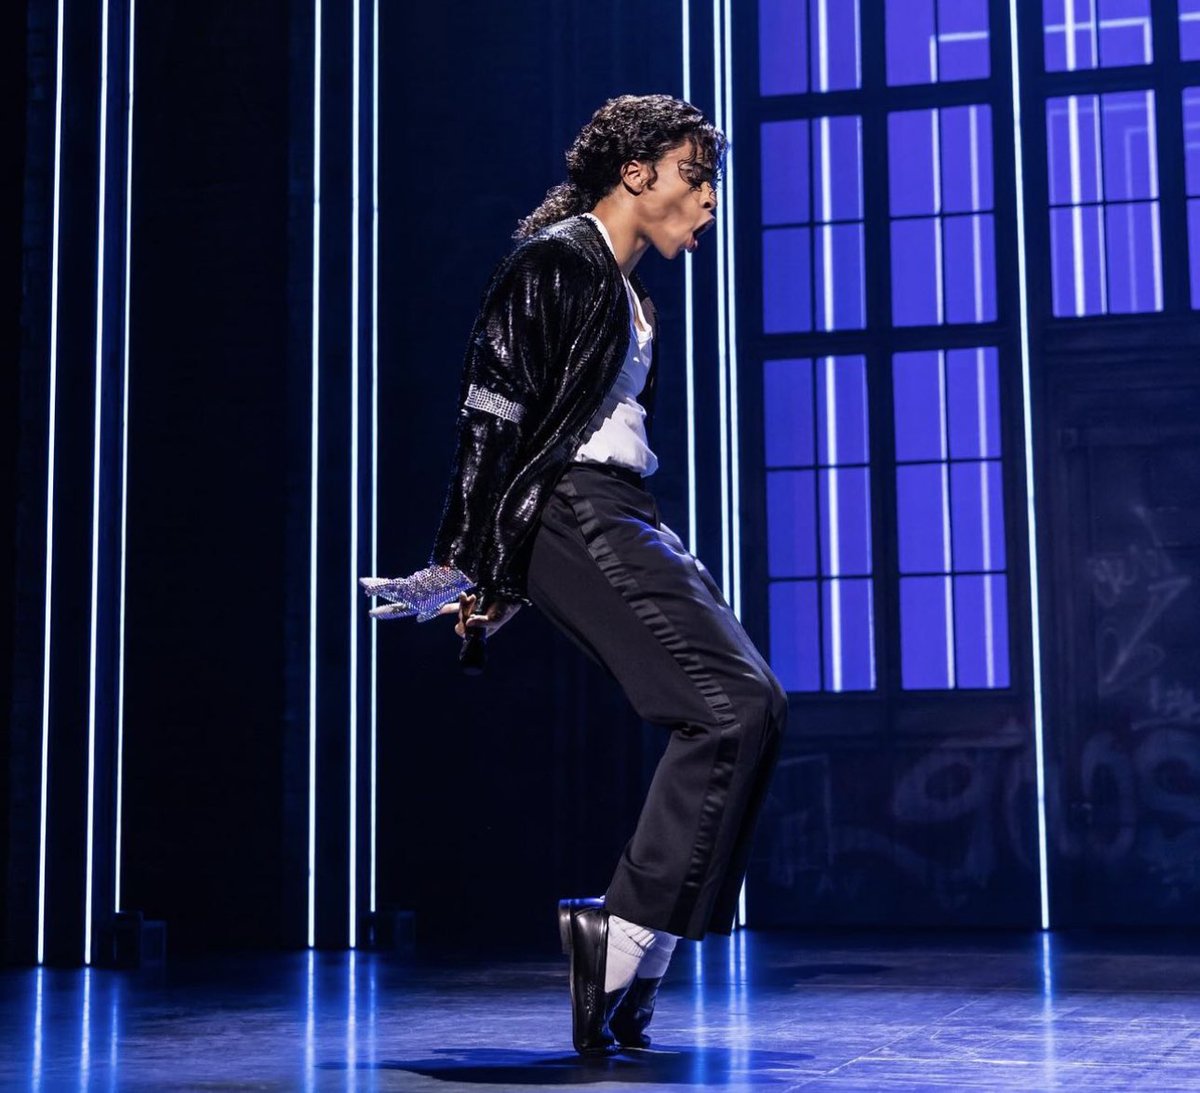 Jamaal Fields-Green (@maally22) will be making his West End DEBUT in the role of MJ at @MJtheMusicalUK today! #USTourCast Jamaal is currently ‘MJ Alternate’ on the First National Tour of @MJtheMusical. He was also part of the Broadway Company as U/S Michael and MJ 🇺🇸